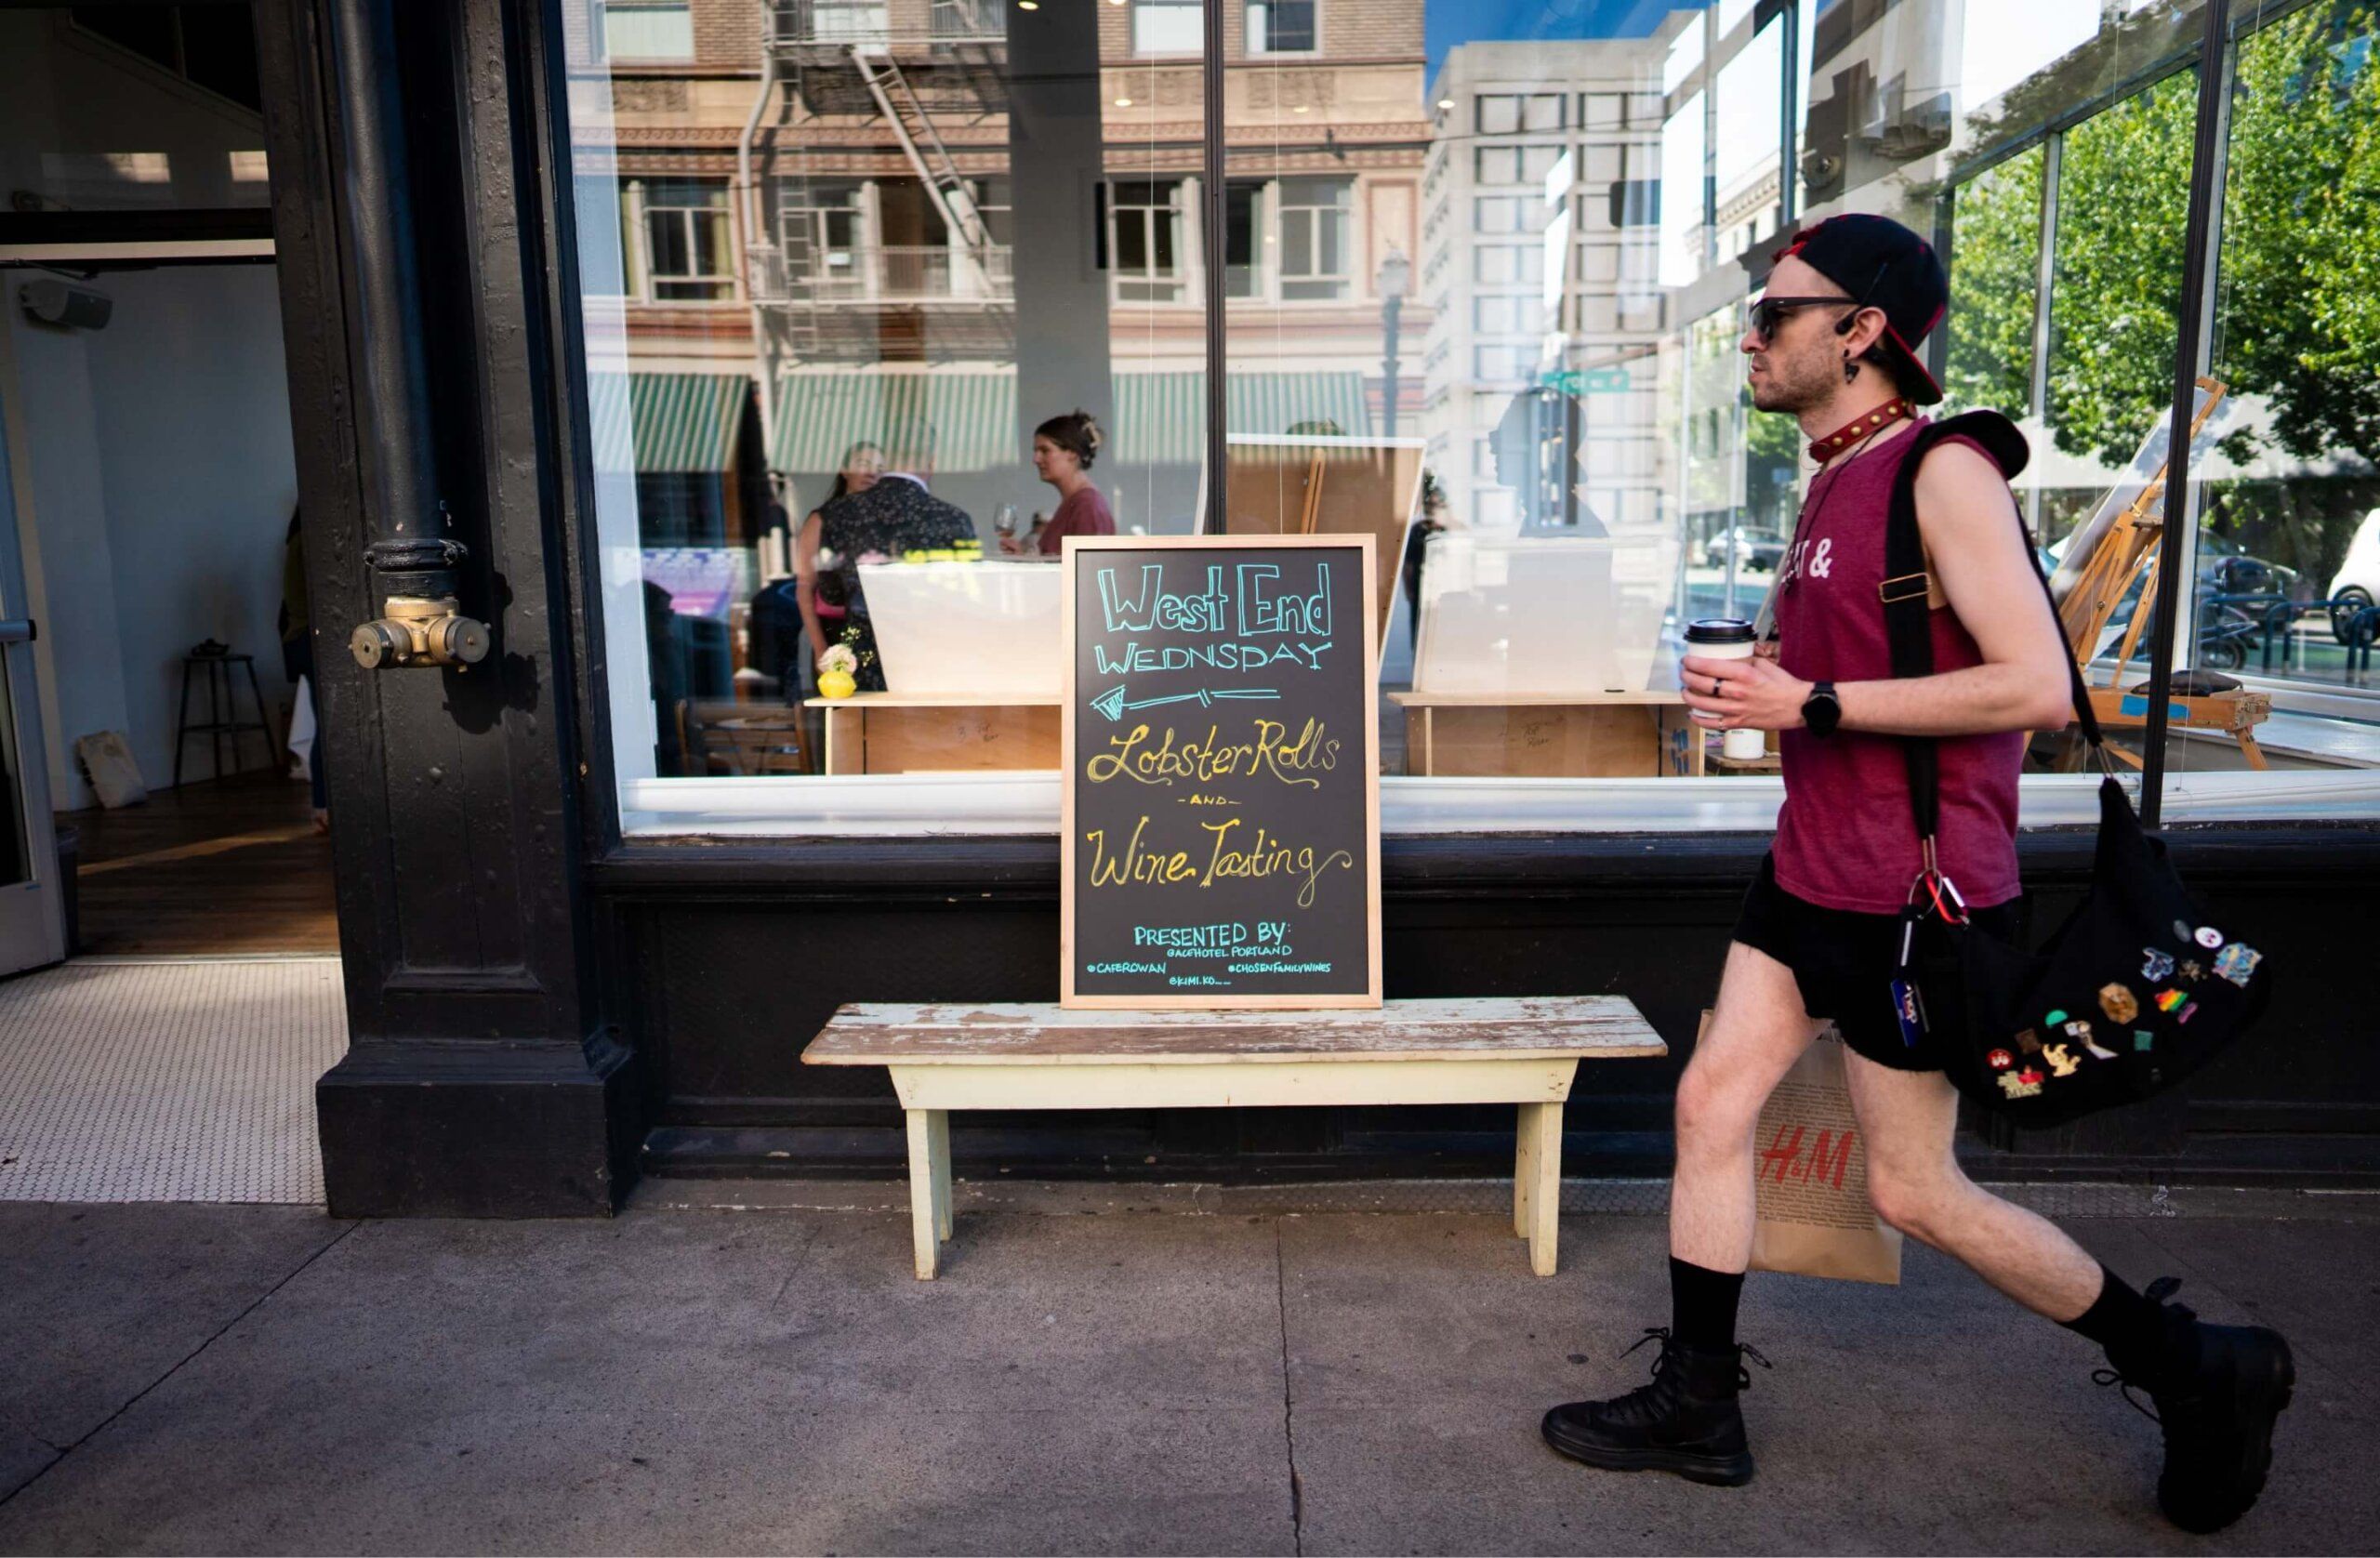 A man walks past a sign in front of a coffee shop.